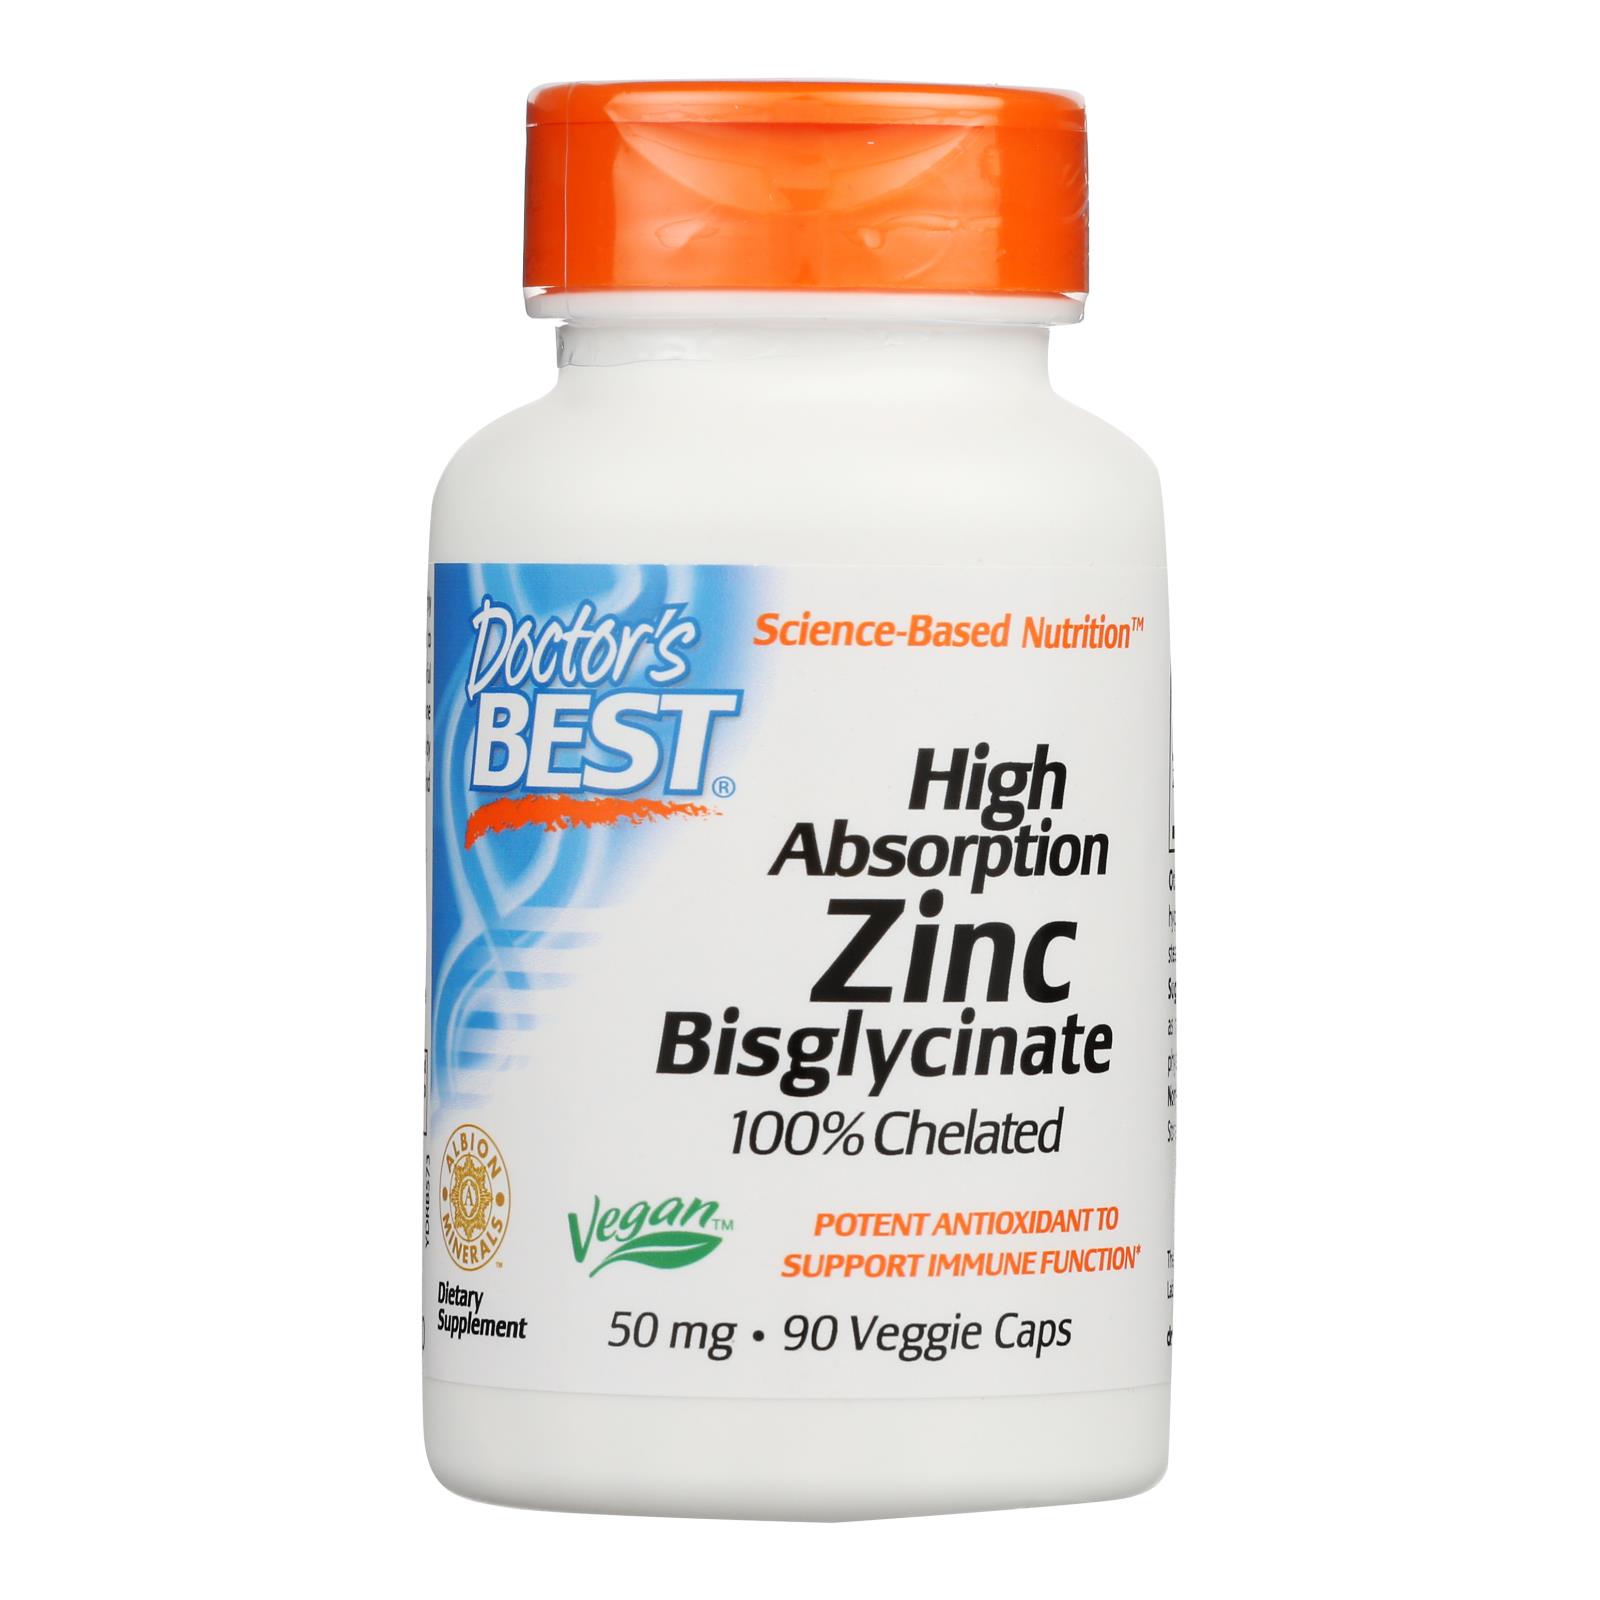 Doctor's Best High Absorption Zinc Bisglycinate, 100% Chelated, 50 mg, 90 Veggie Caps - image 1 of 3